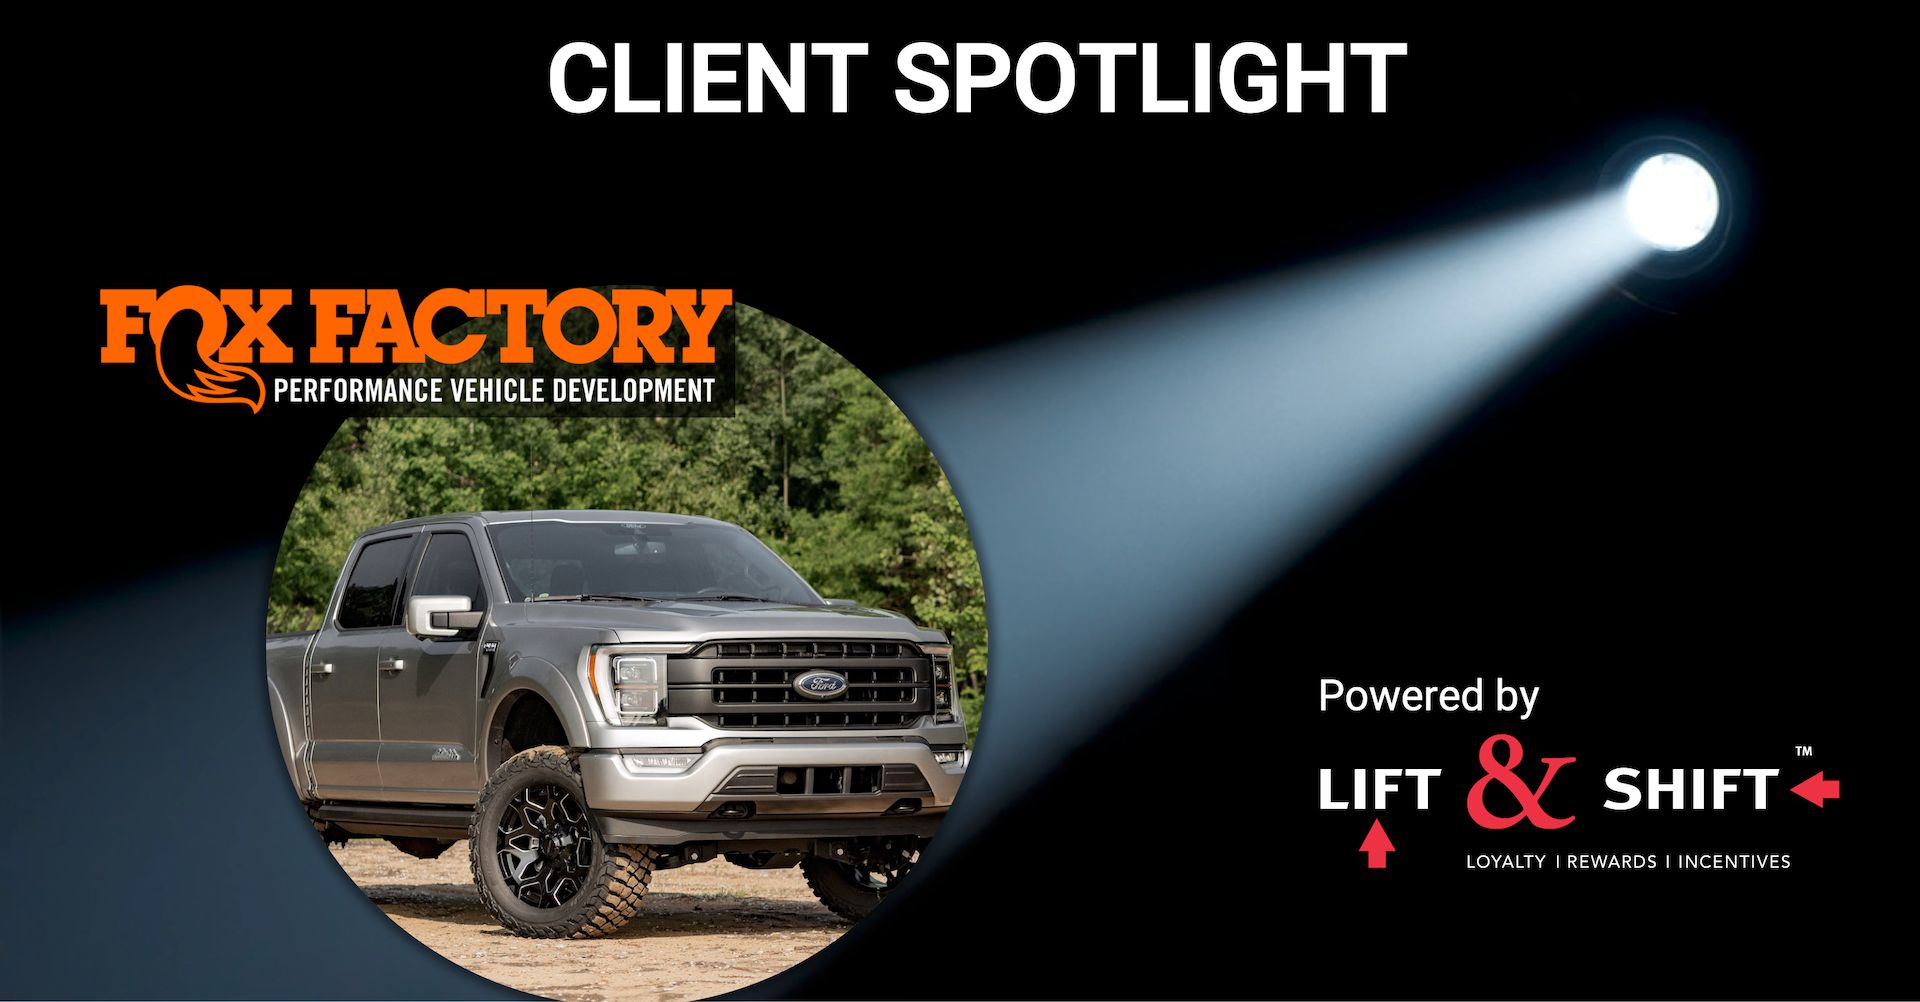 A fox factory truck is being spotlighted by a spotlight